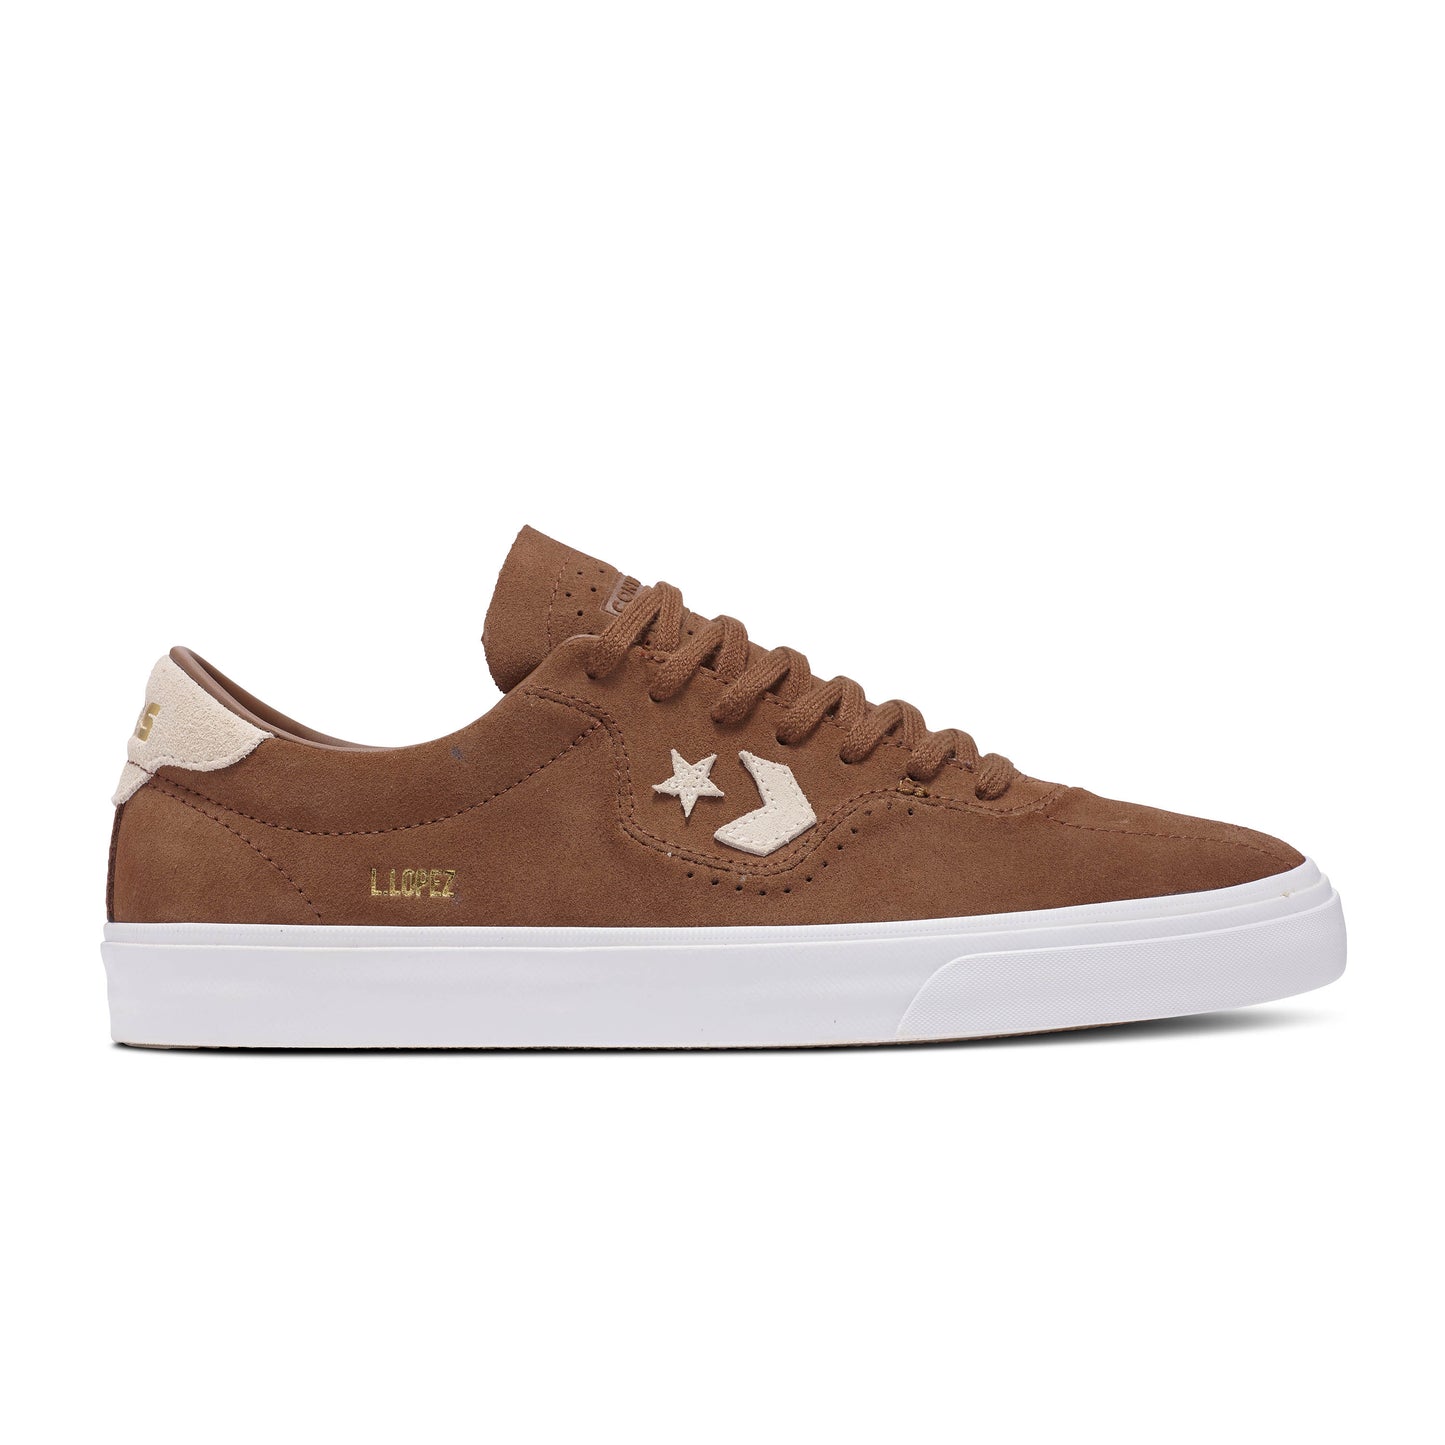 CONVERSE CONS - Louie Lopez Pro Ox Chestnut Brown/Natural Ivory